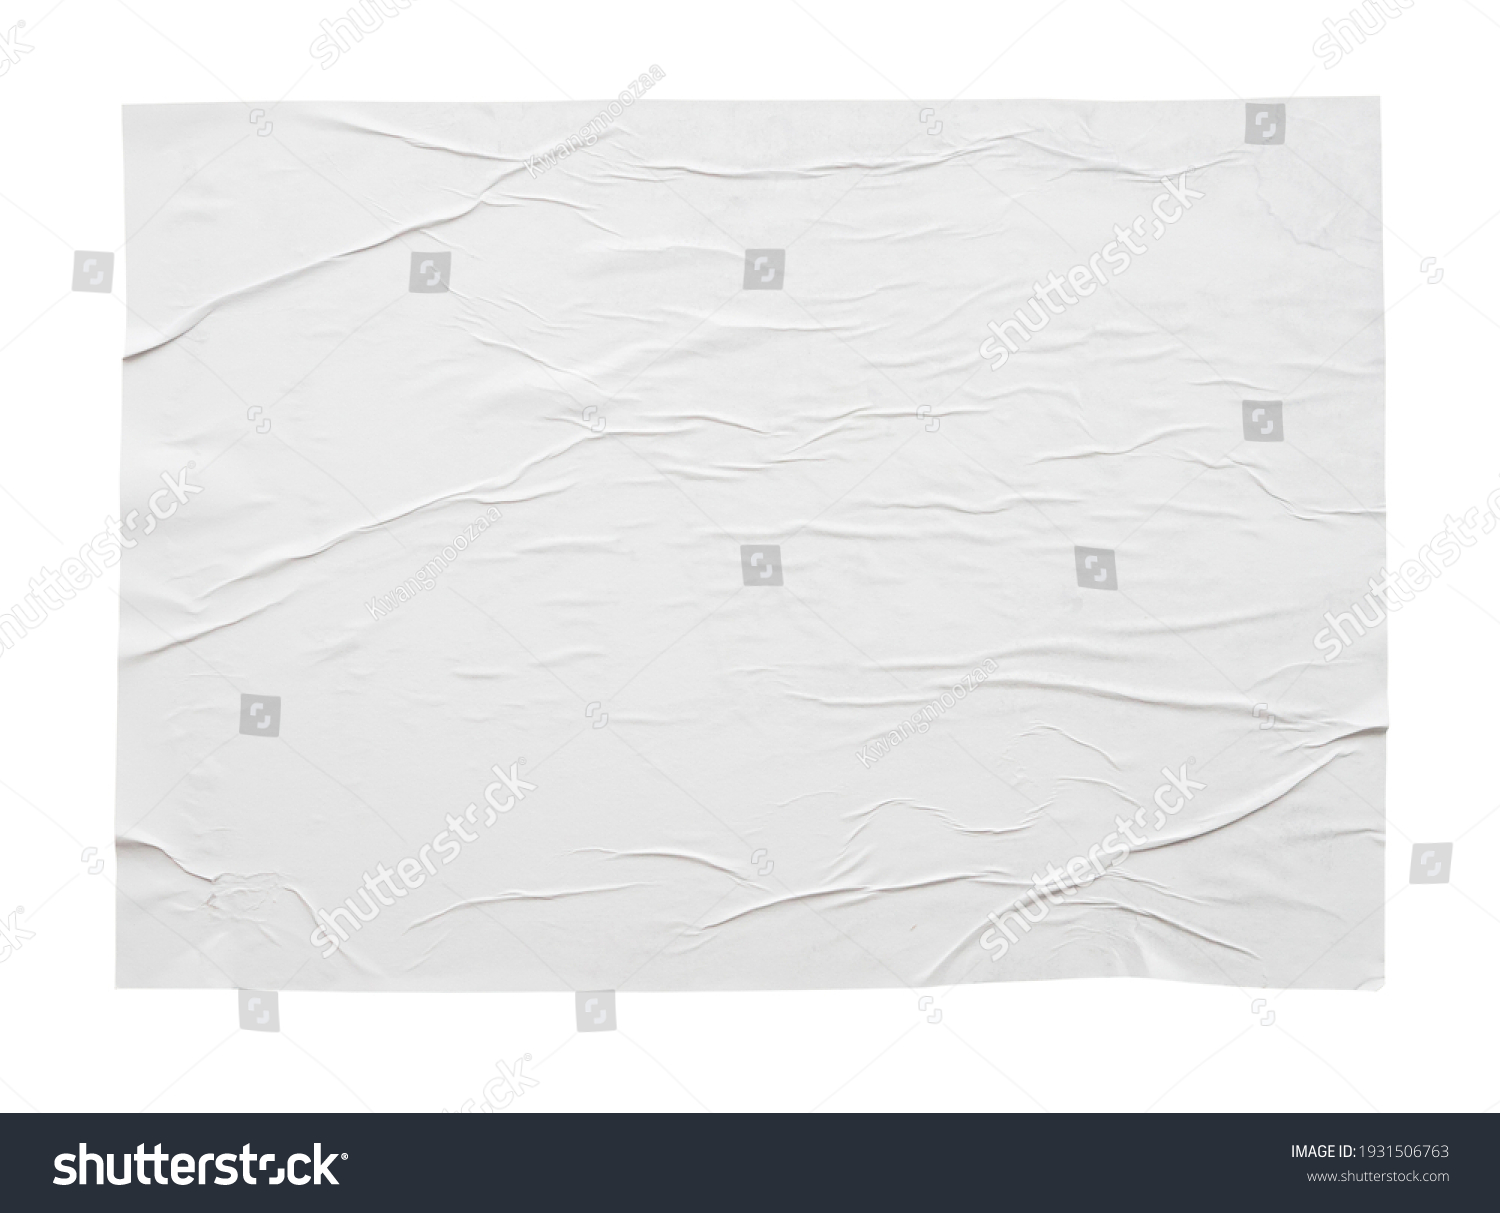 Blank white crumpled and creased sticker paper poster texture isolated on white background #1931506763